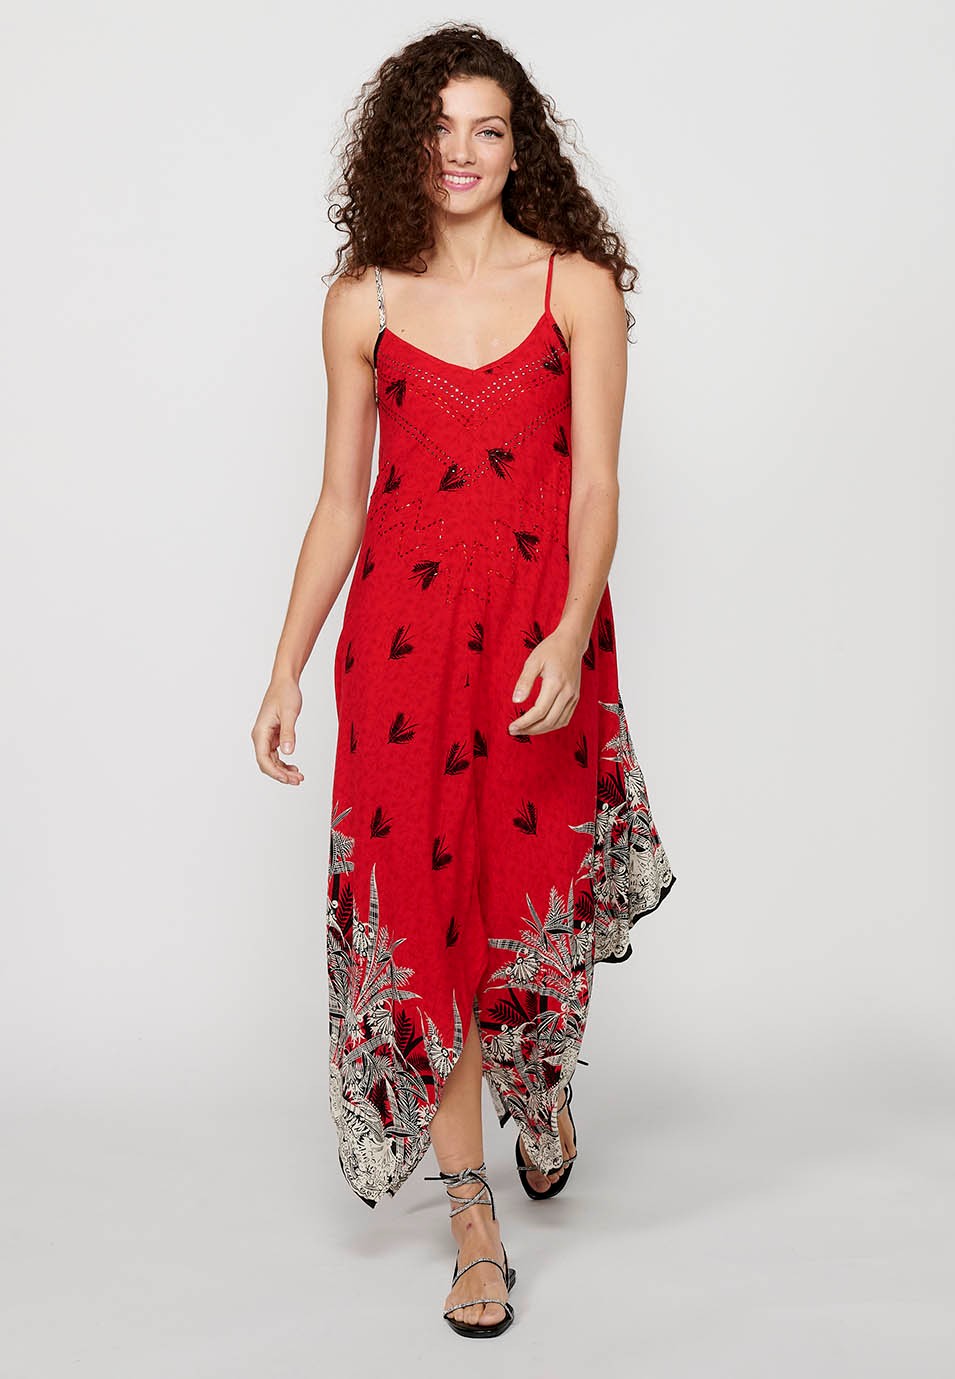 Strap Dress with V-neckline and Red Floral Print for Women 1